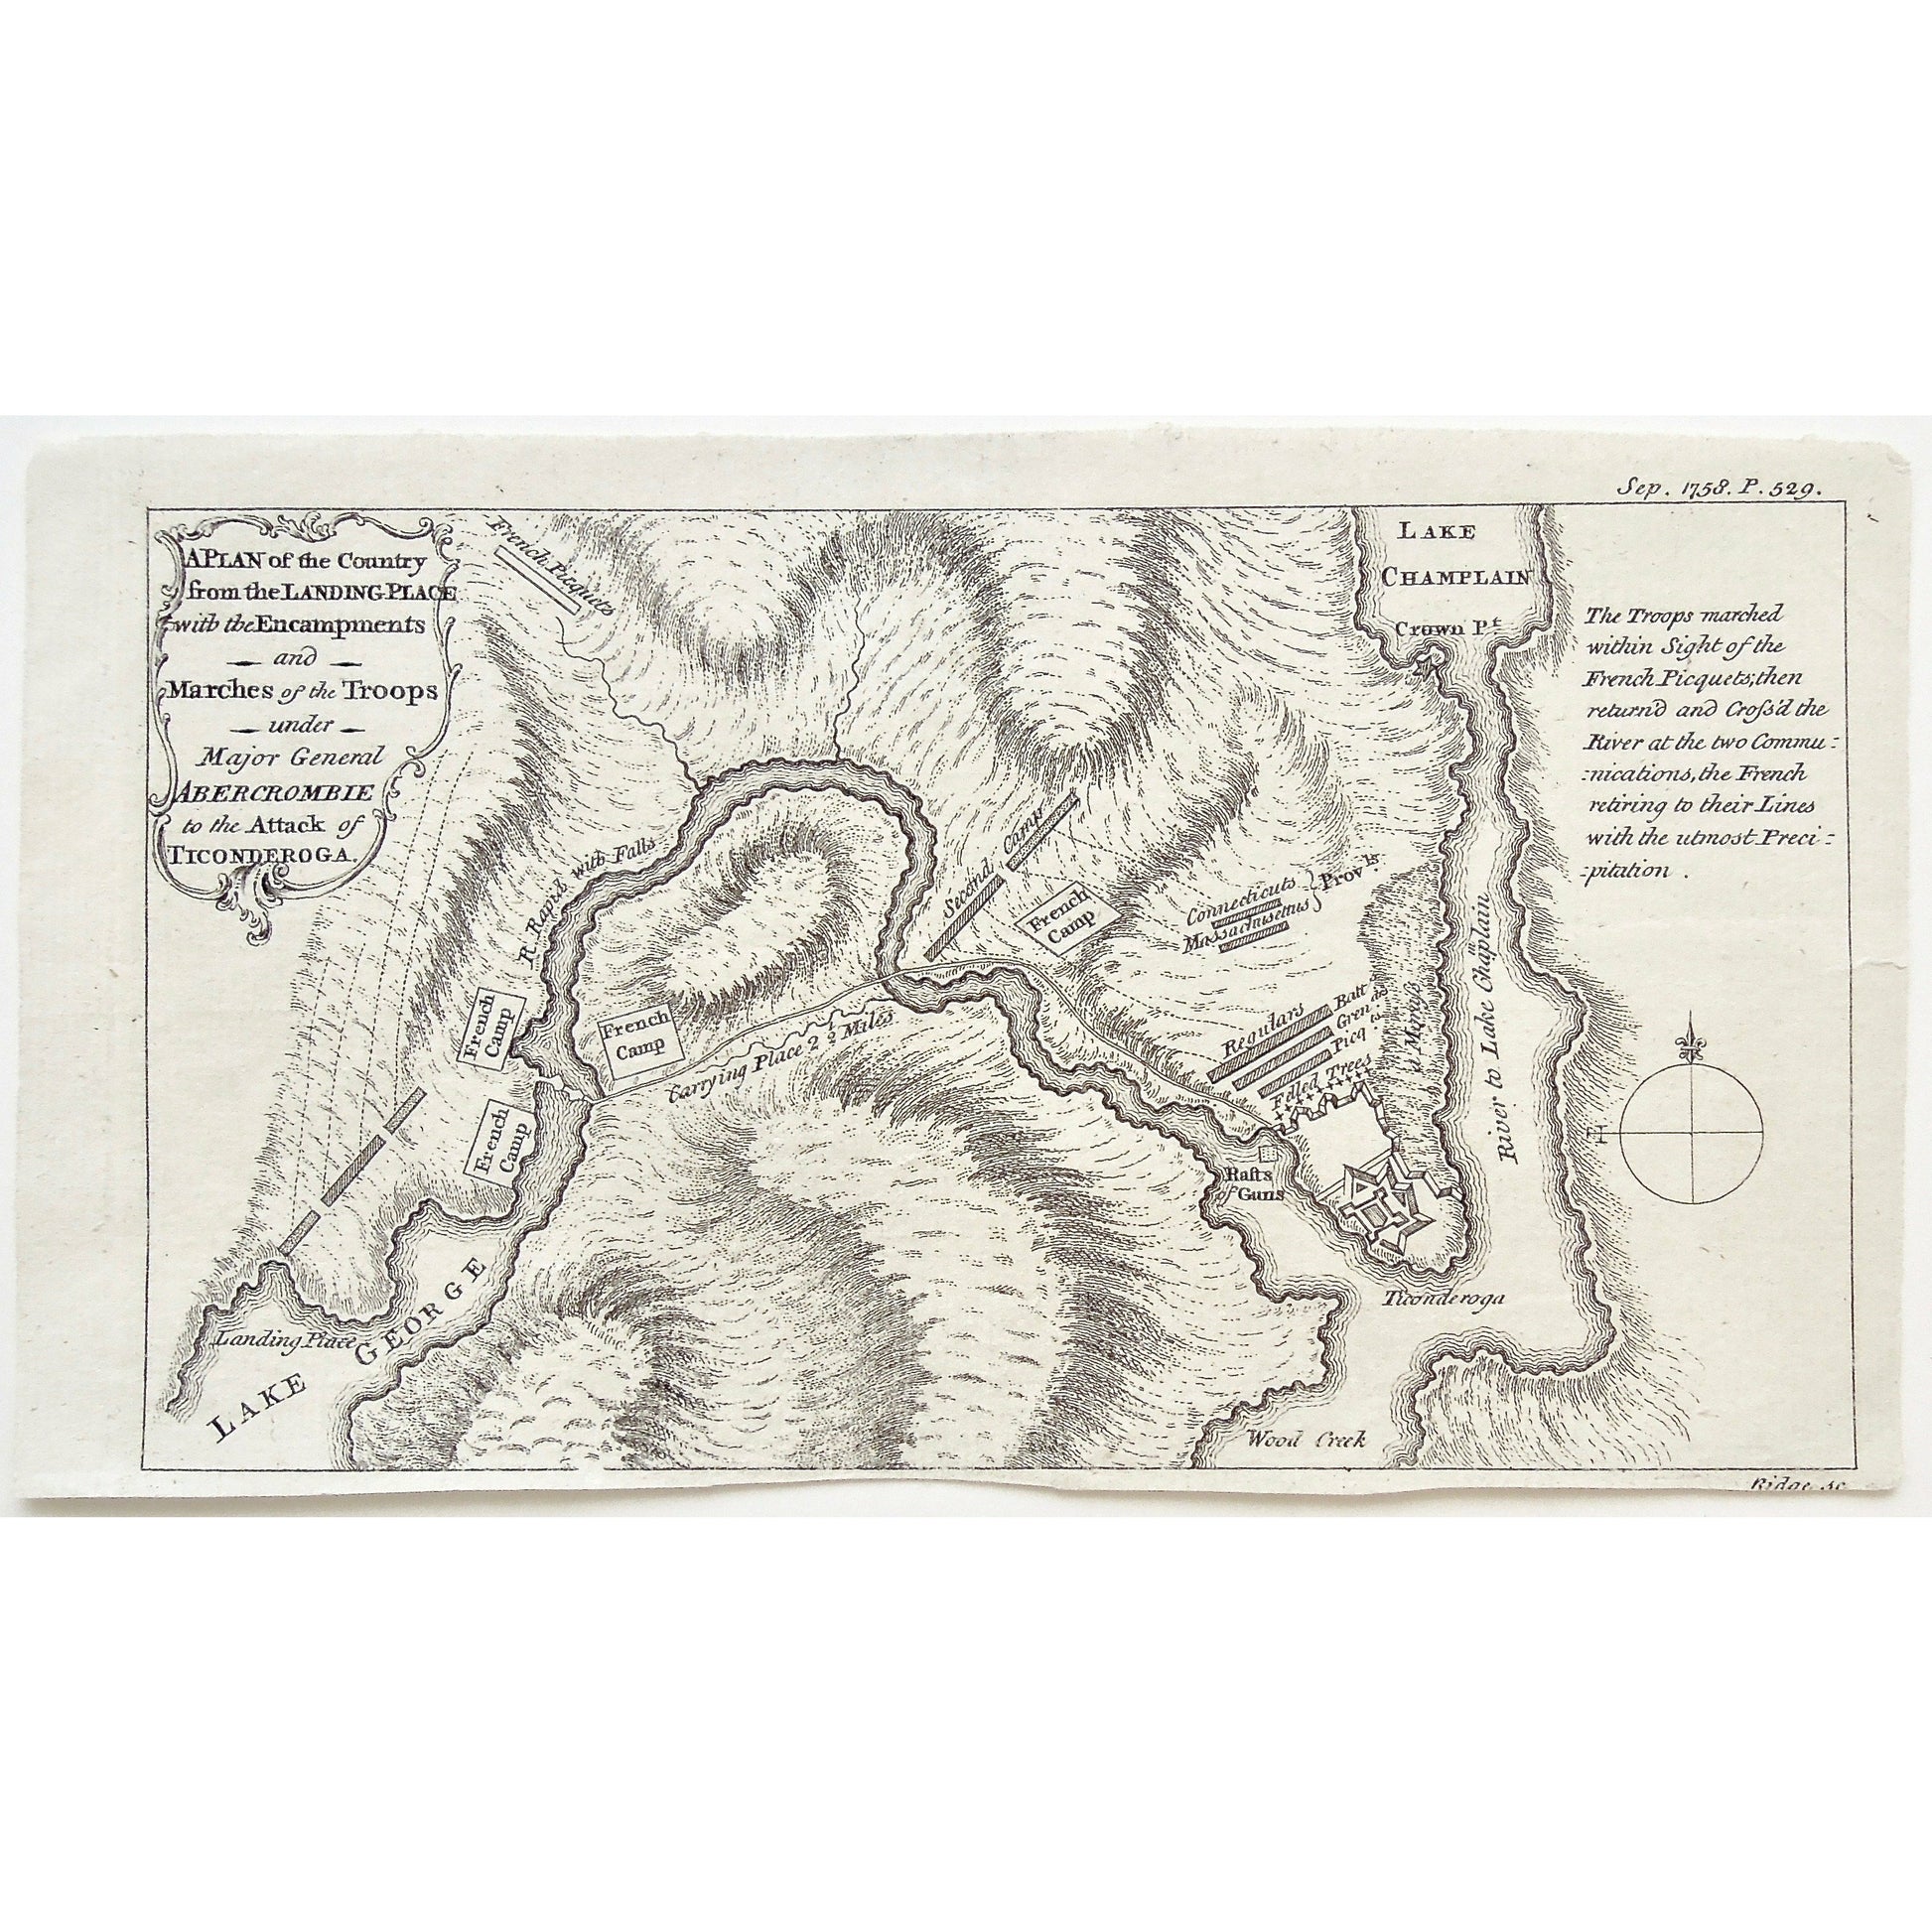 Plan, Landing Place, Encampments, Marches of the Troops, Marches, Troops, Major General Abercrombie, Abercrombie, Attack of Ticonderoga, Attack, Ticonderoga, Lake George, French Camp, French encampments, River Rapid with Falls, French Picquets, Carrying Place, Second Camp, Raft of Guns, Wood Creek, River to Lake Champlain, Lake Champlain, Crown Point, Connecticut, Massachusetts, Regulars, Ridge, Antique Prints, Antique, Prints, Original, Map, Maps, Map making, Rare Maps, Plans, Chart, Charts, Charting, art,